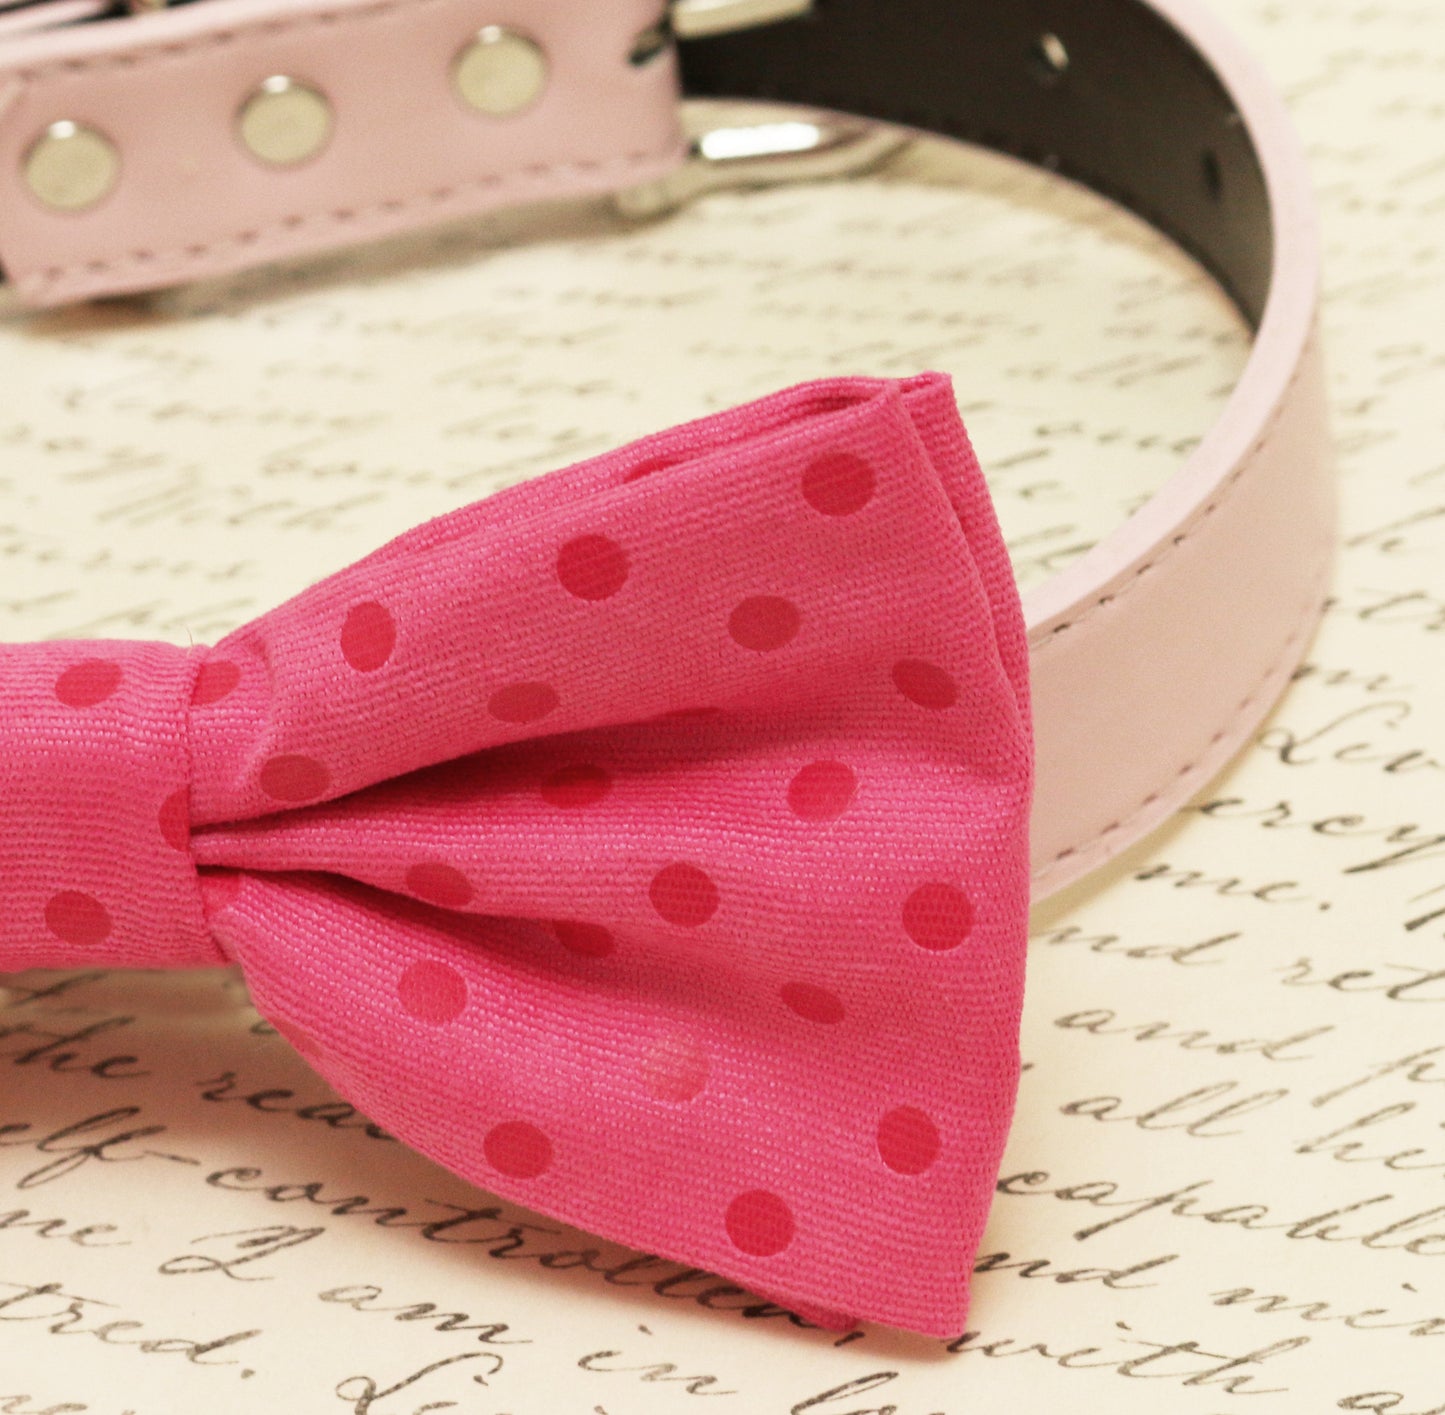 Hot pink dog Bow tie attached to collar, Pet wedding Polka dots bow tie , Wedding dog collar